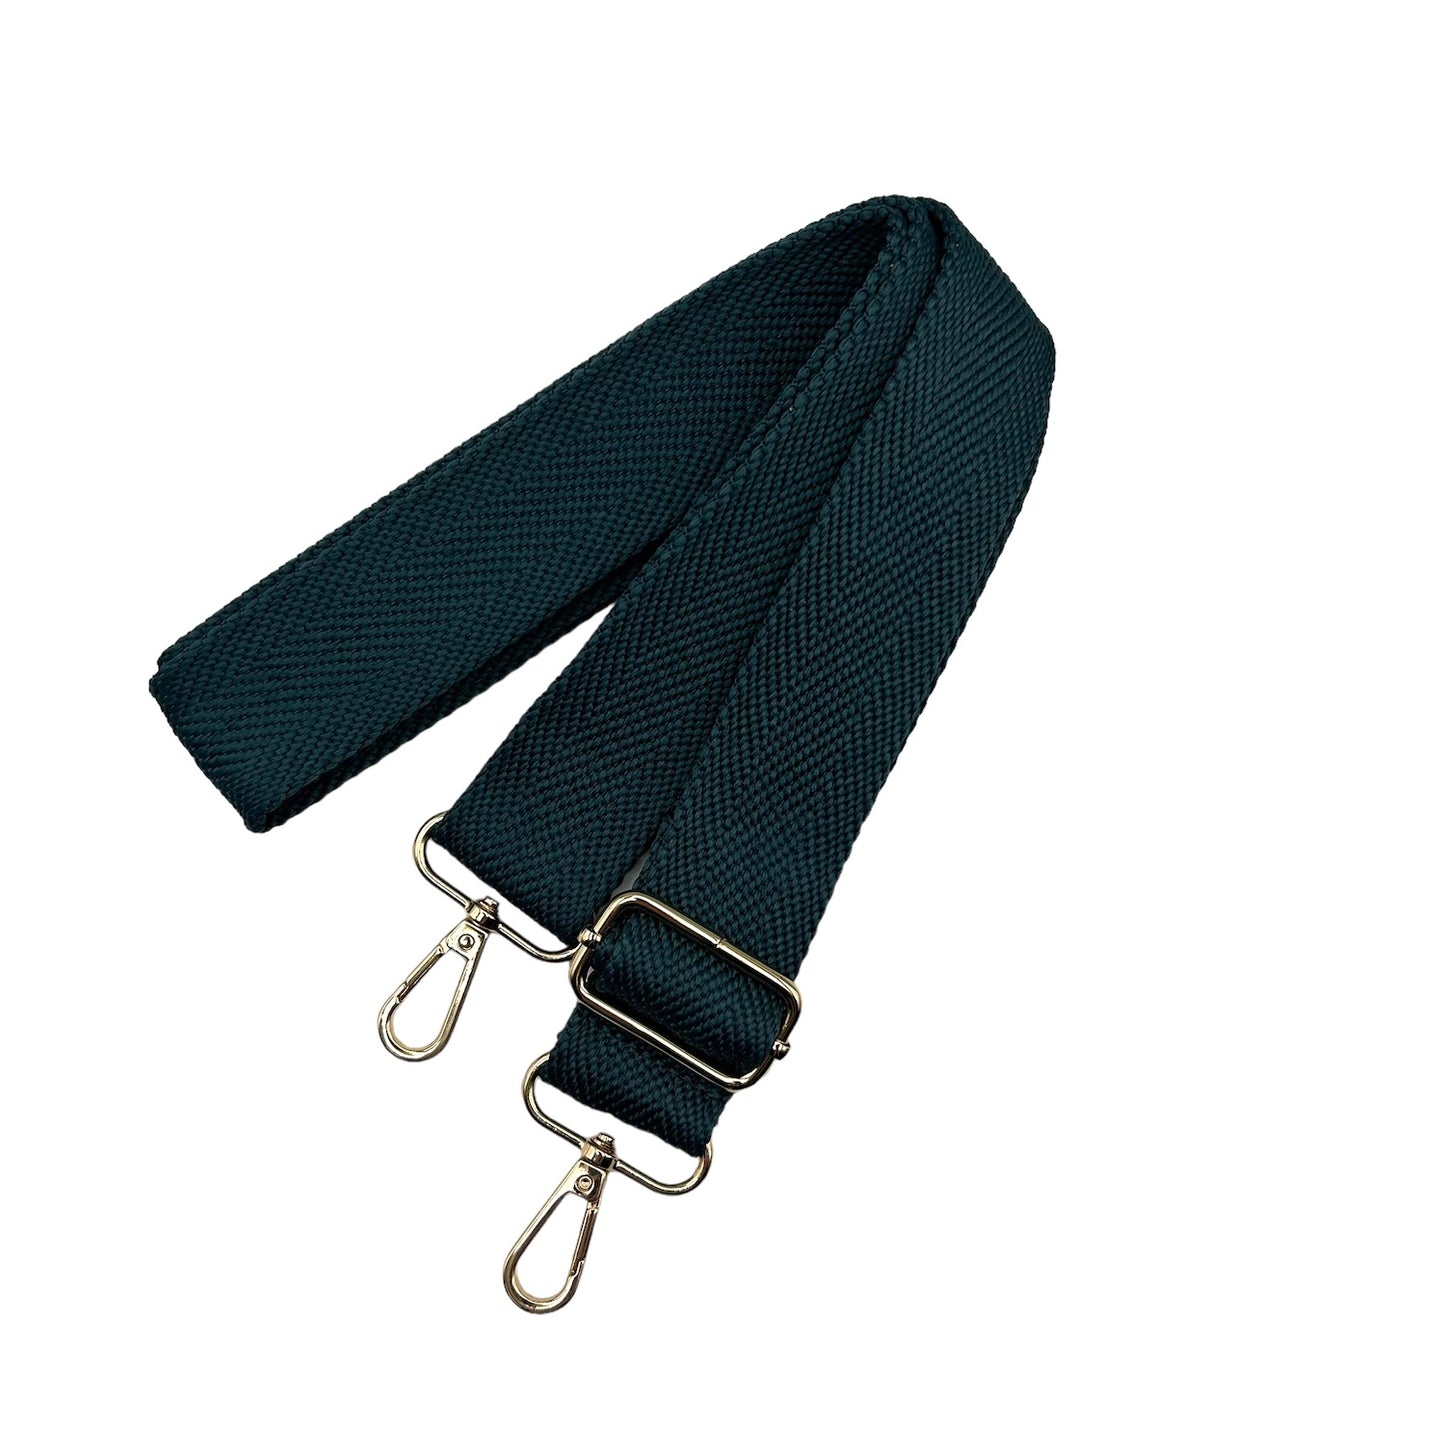 New teal webbing strap, recycled nylon